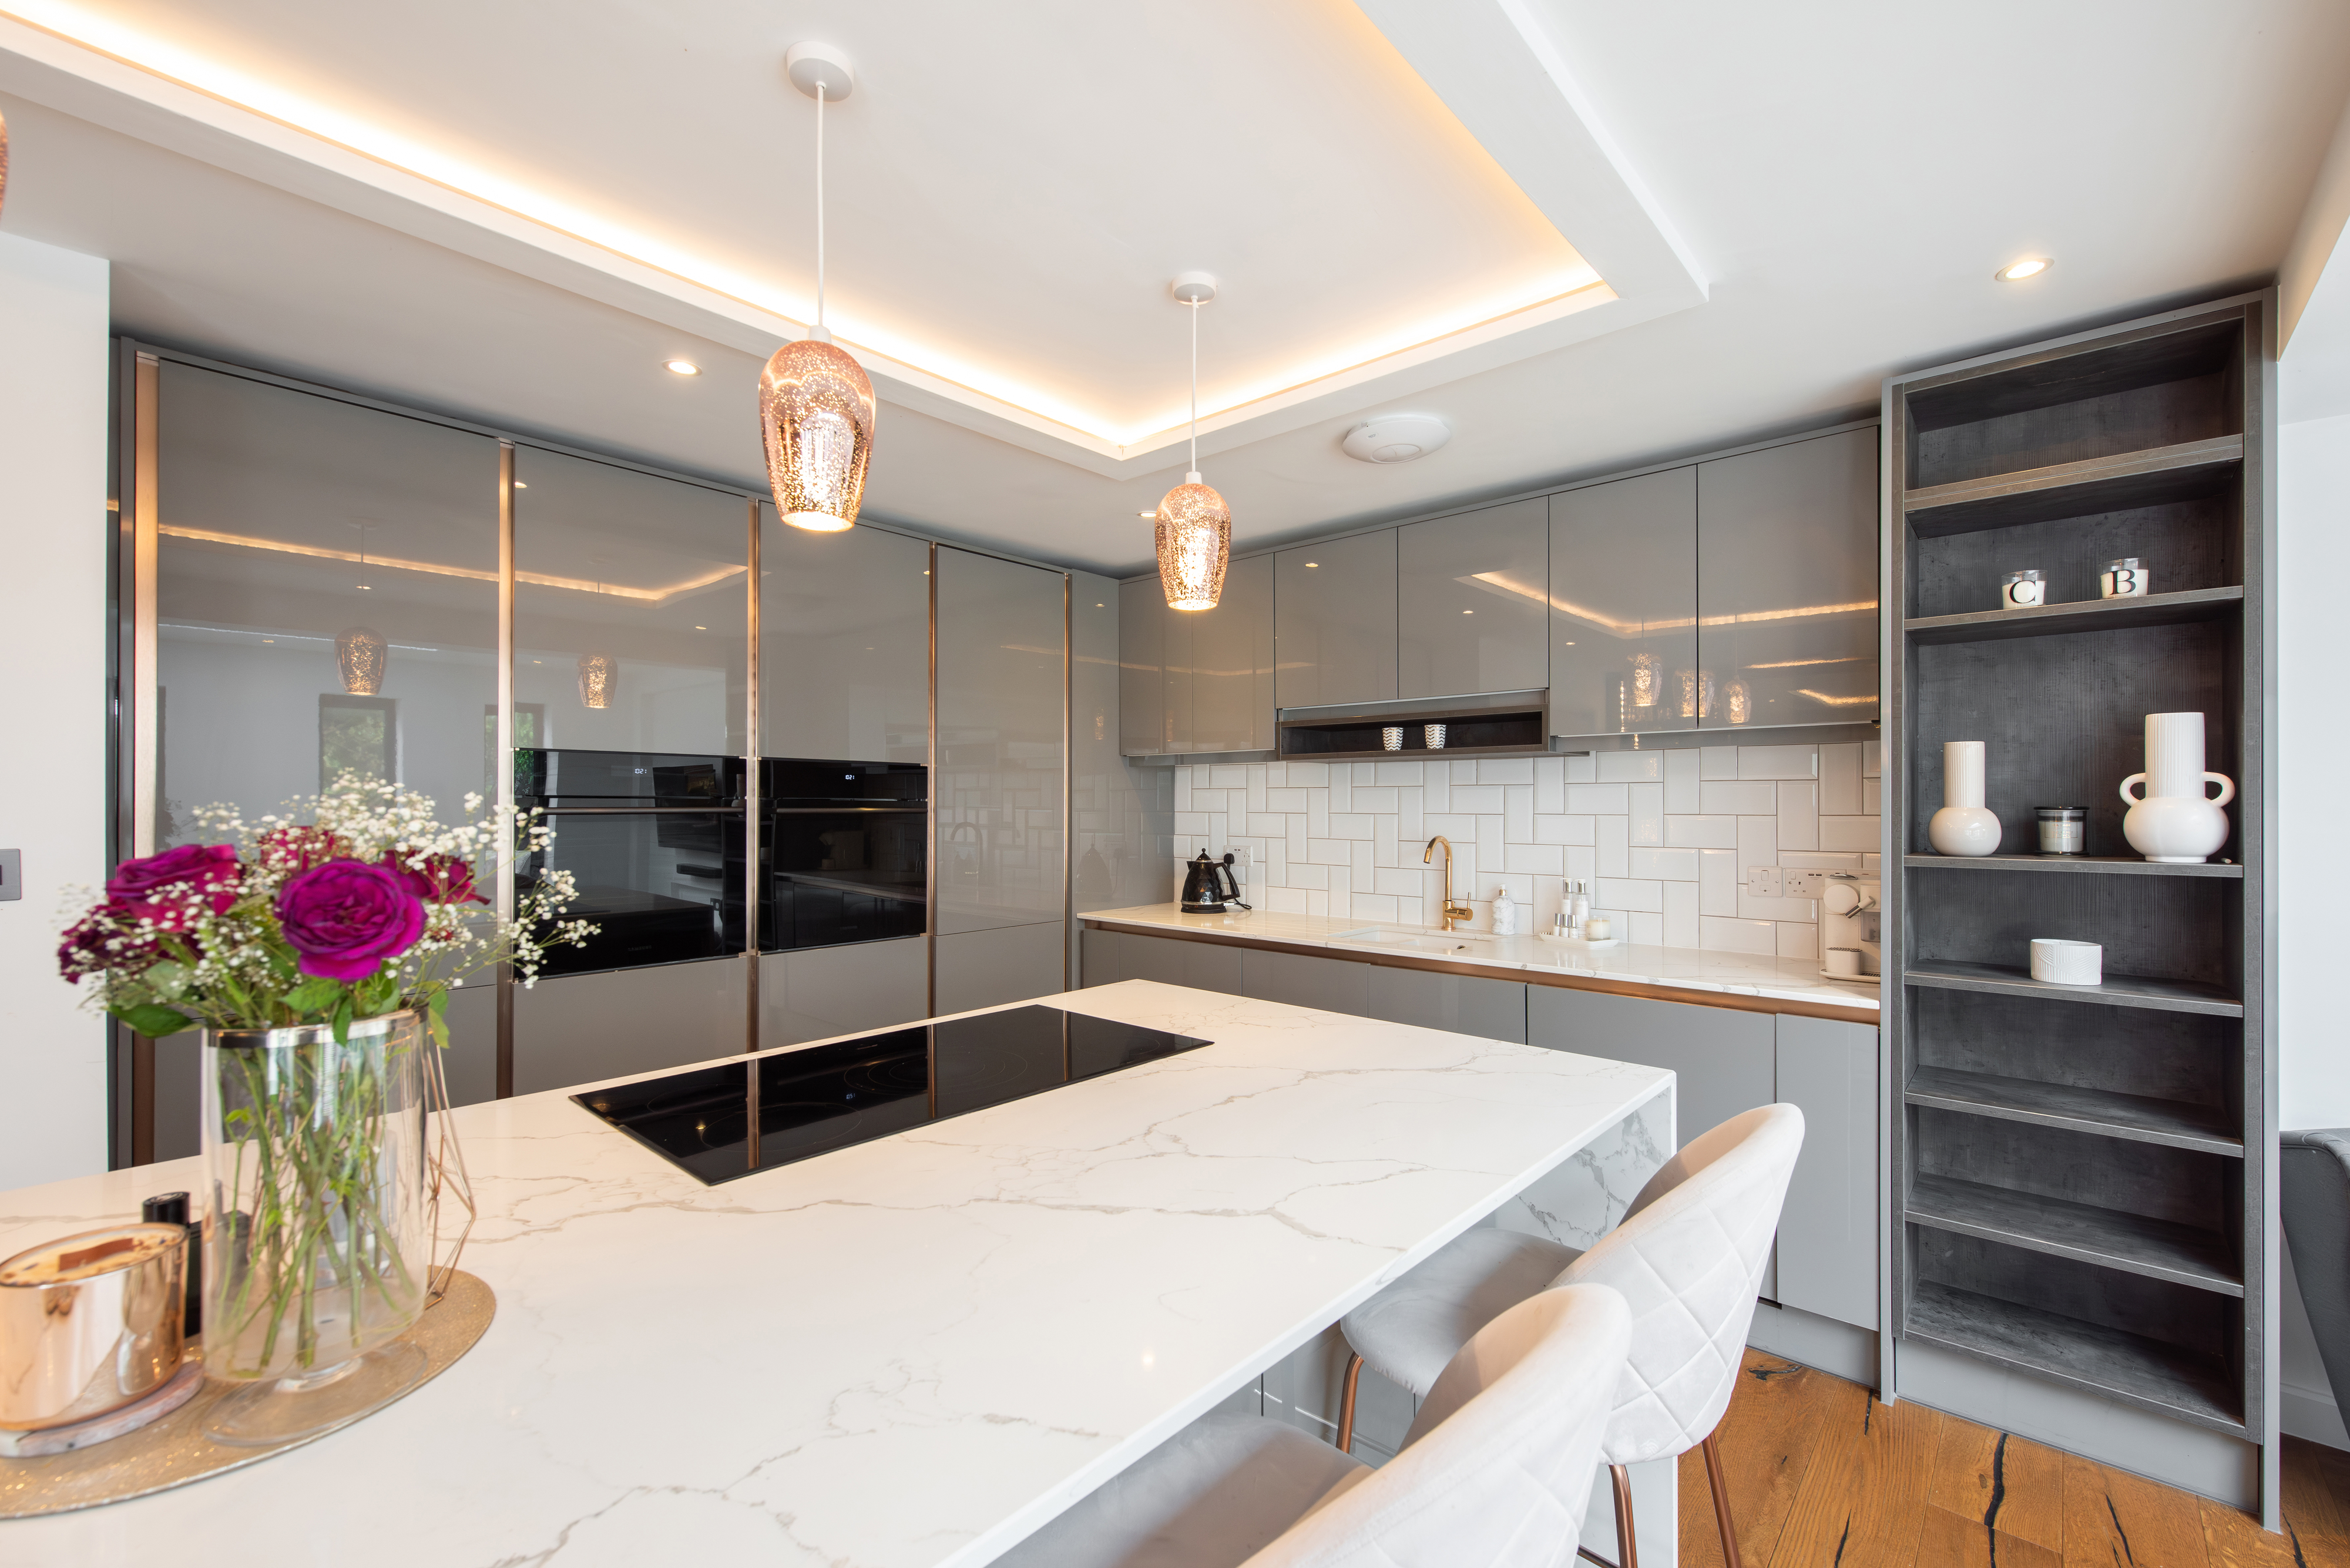 Modern kitchen with marble countertops, built-in appliances, and pendant lights